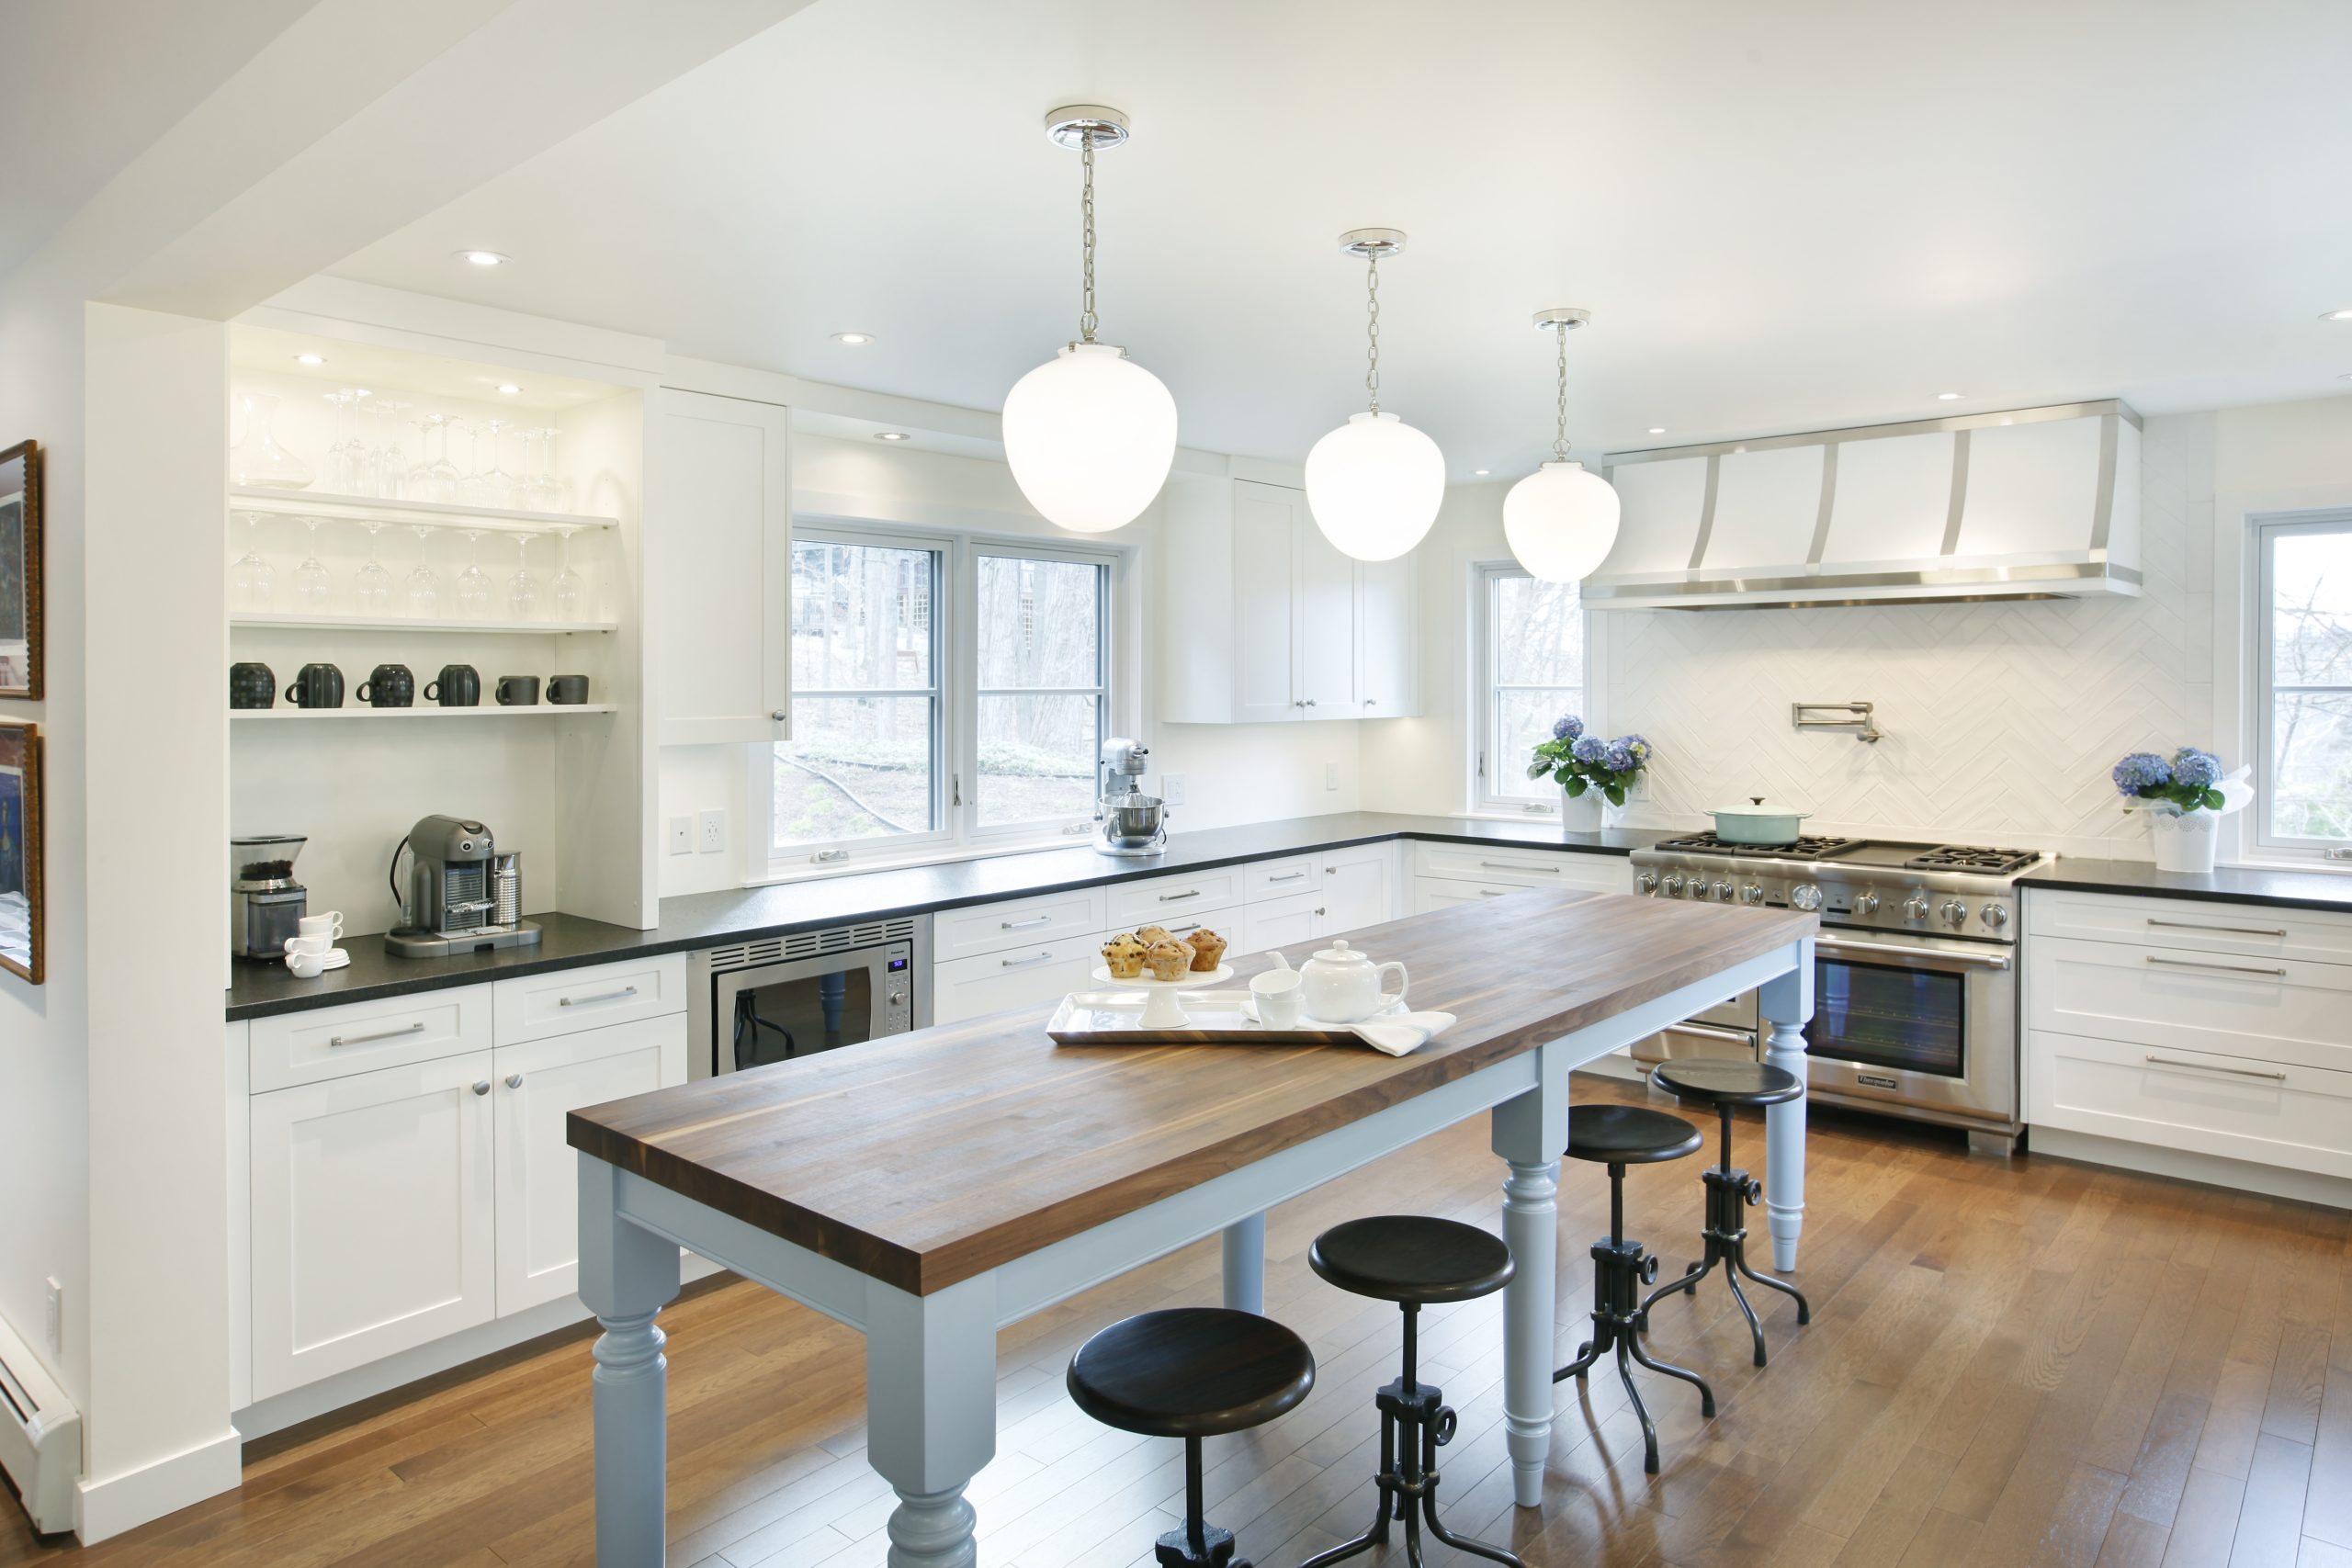 Why You Should Love Modern Farmhouse Kitchens